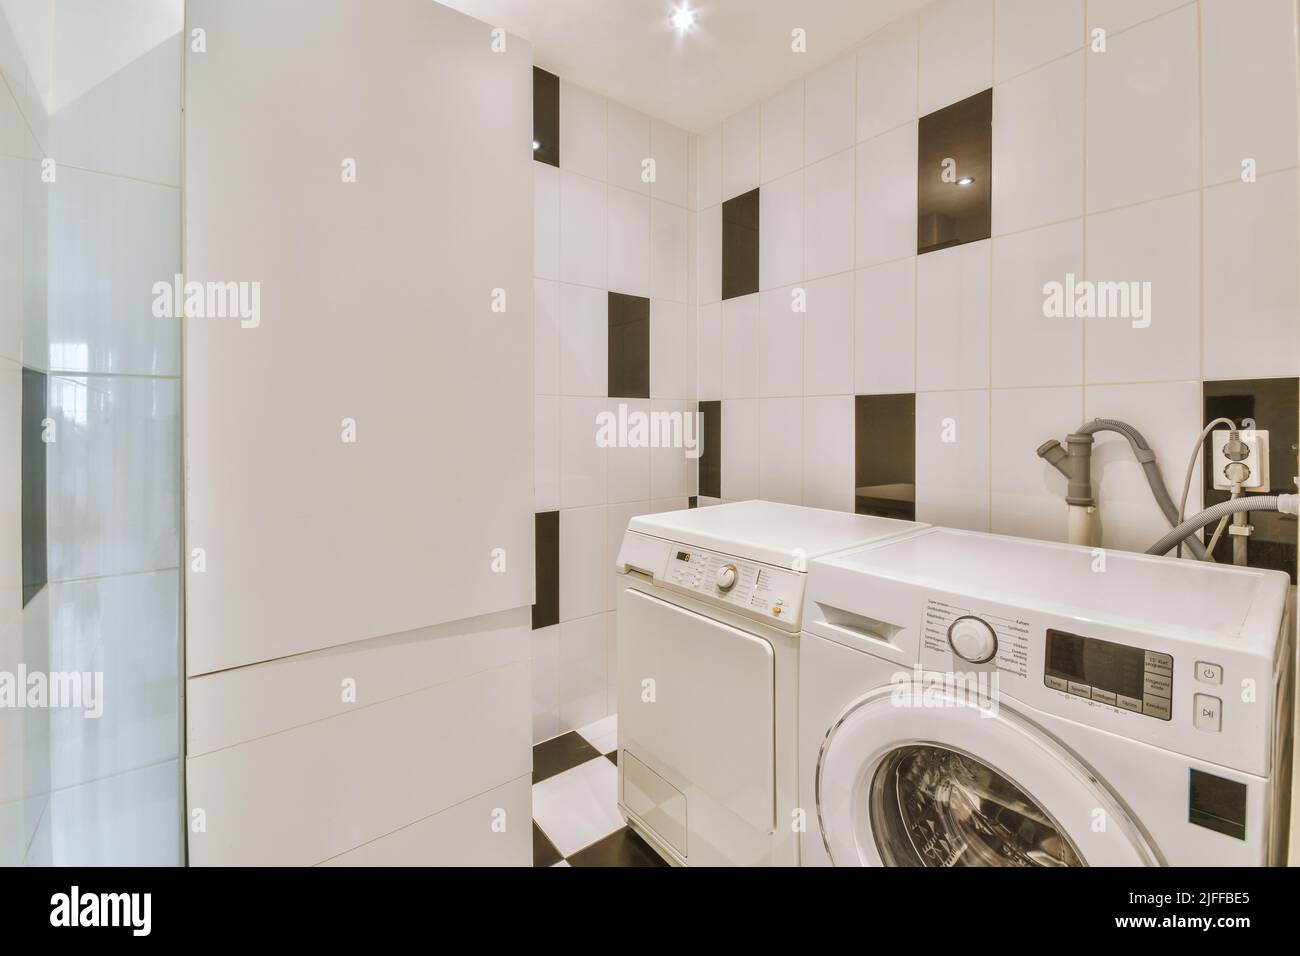 Washing machine and dryer in a bright room with white and black tiles and white pipes on the wall Stock Photo